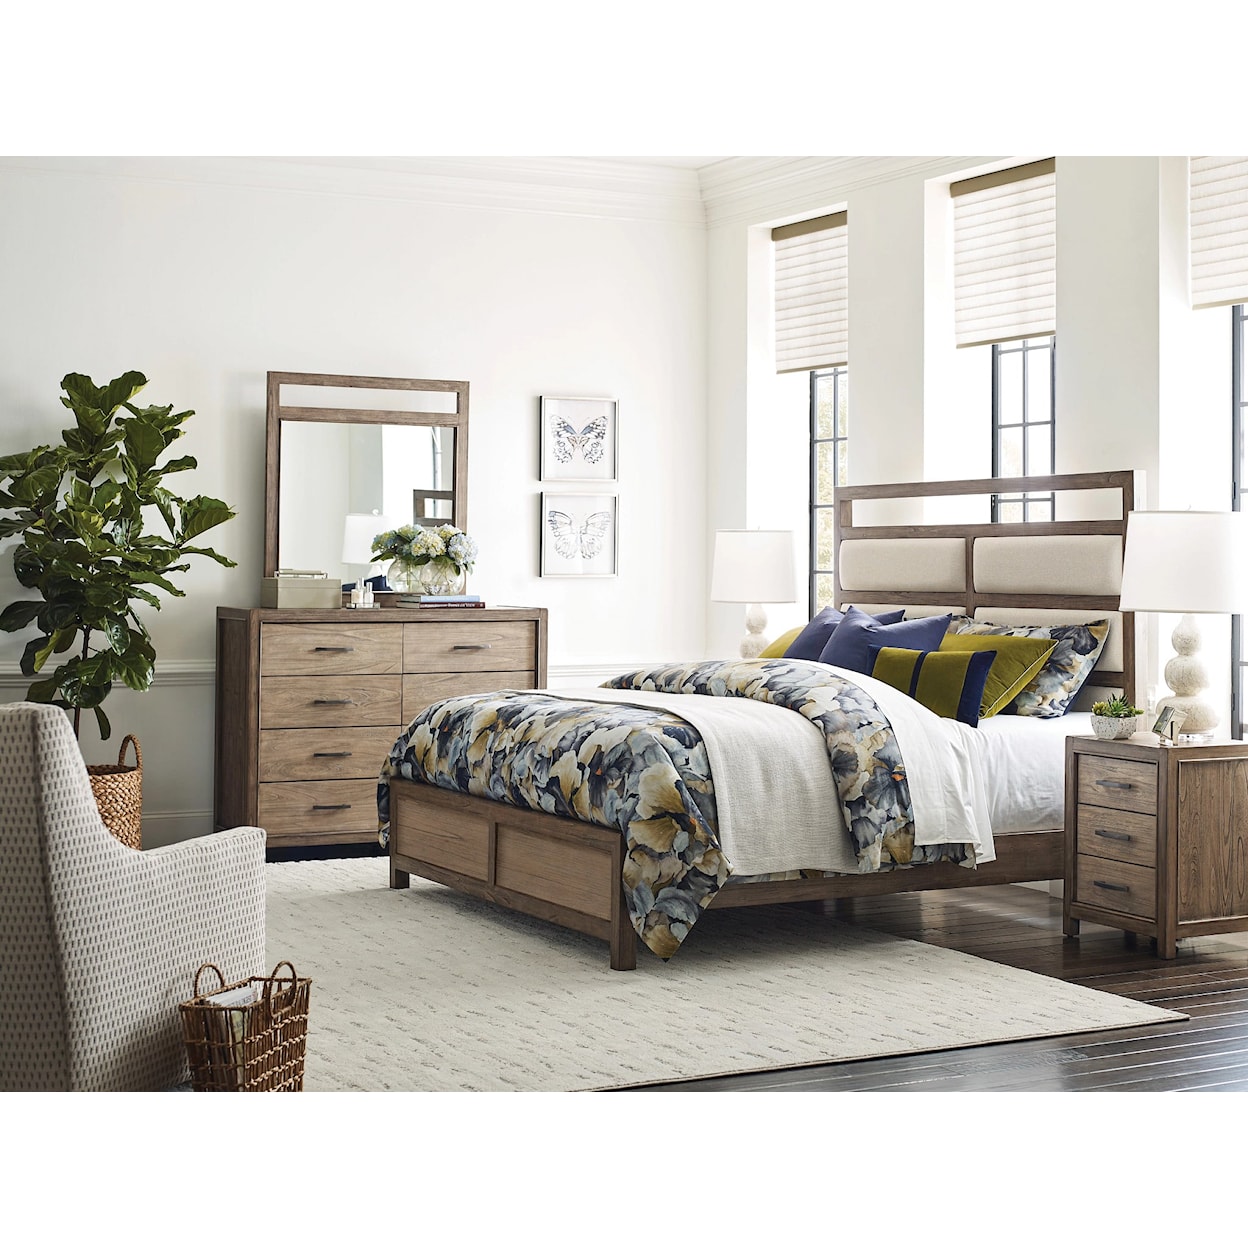 Kincaid Furniture Debut Wyatt Queen Upholstered Bed - Complete